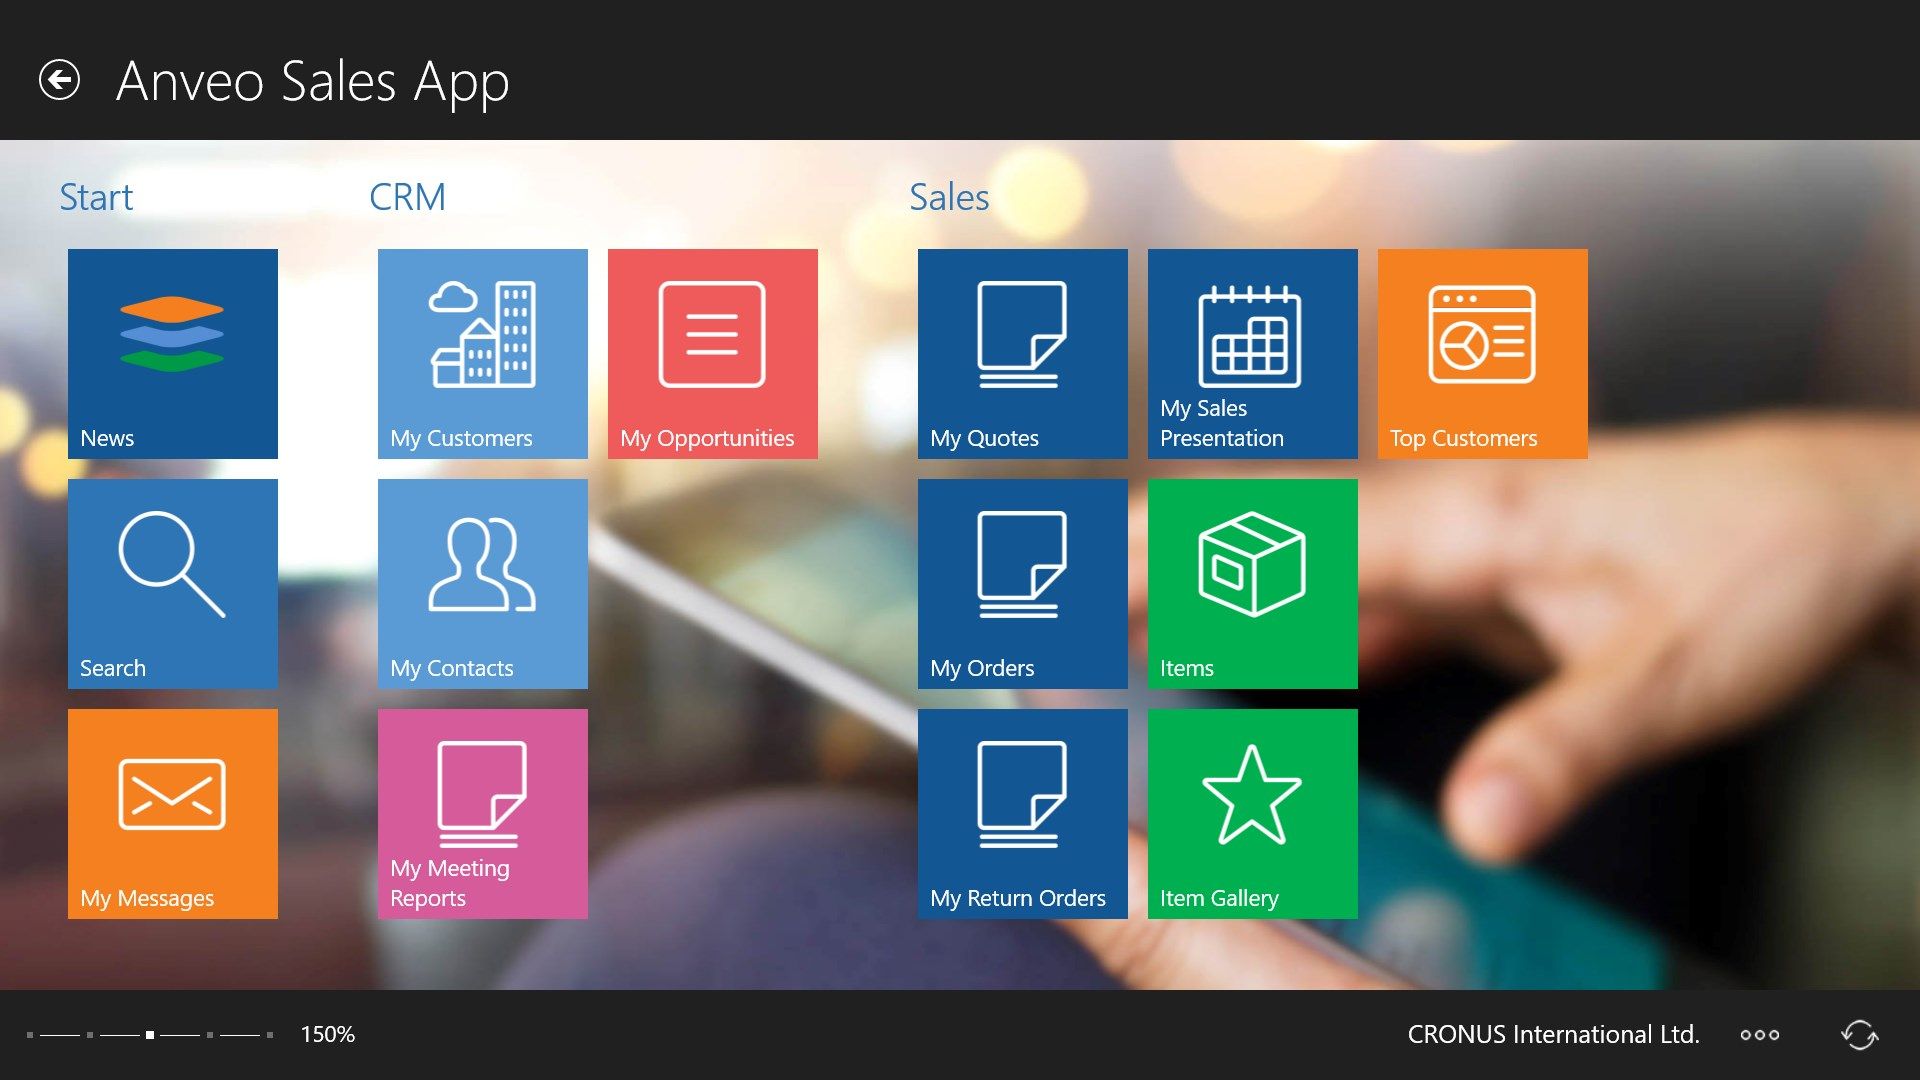 Main menu of the Sales App with access to all important features for mobile sales representatives. It can be customized to your own needs with just a few clicks.